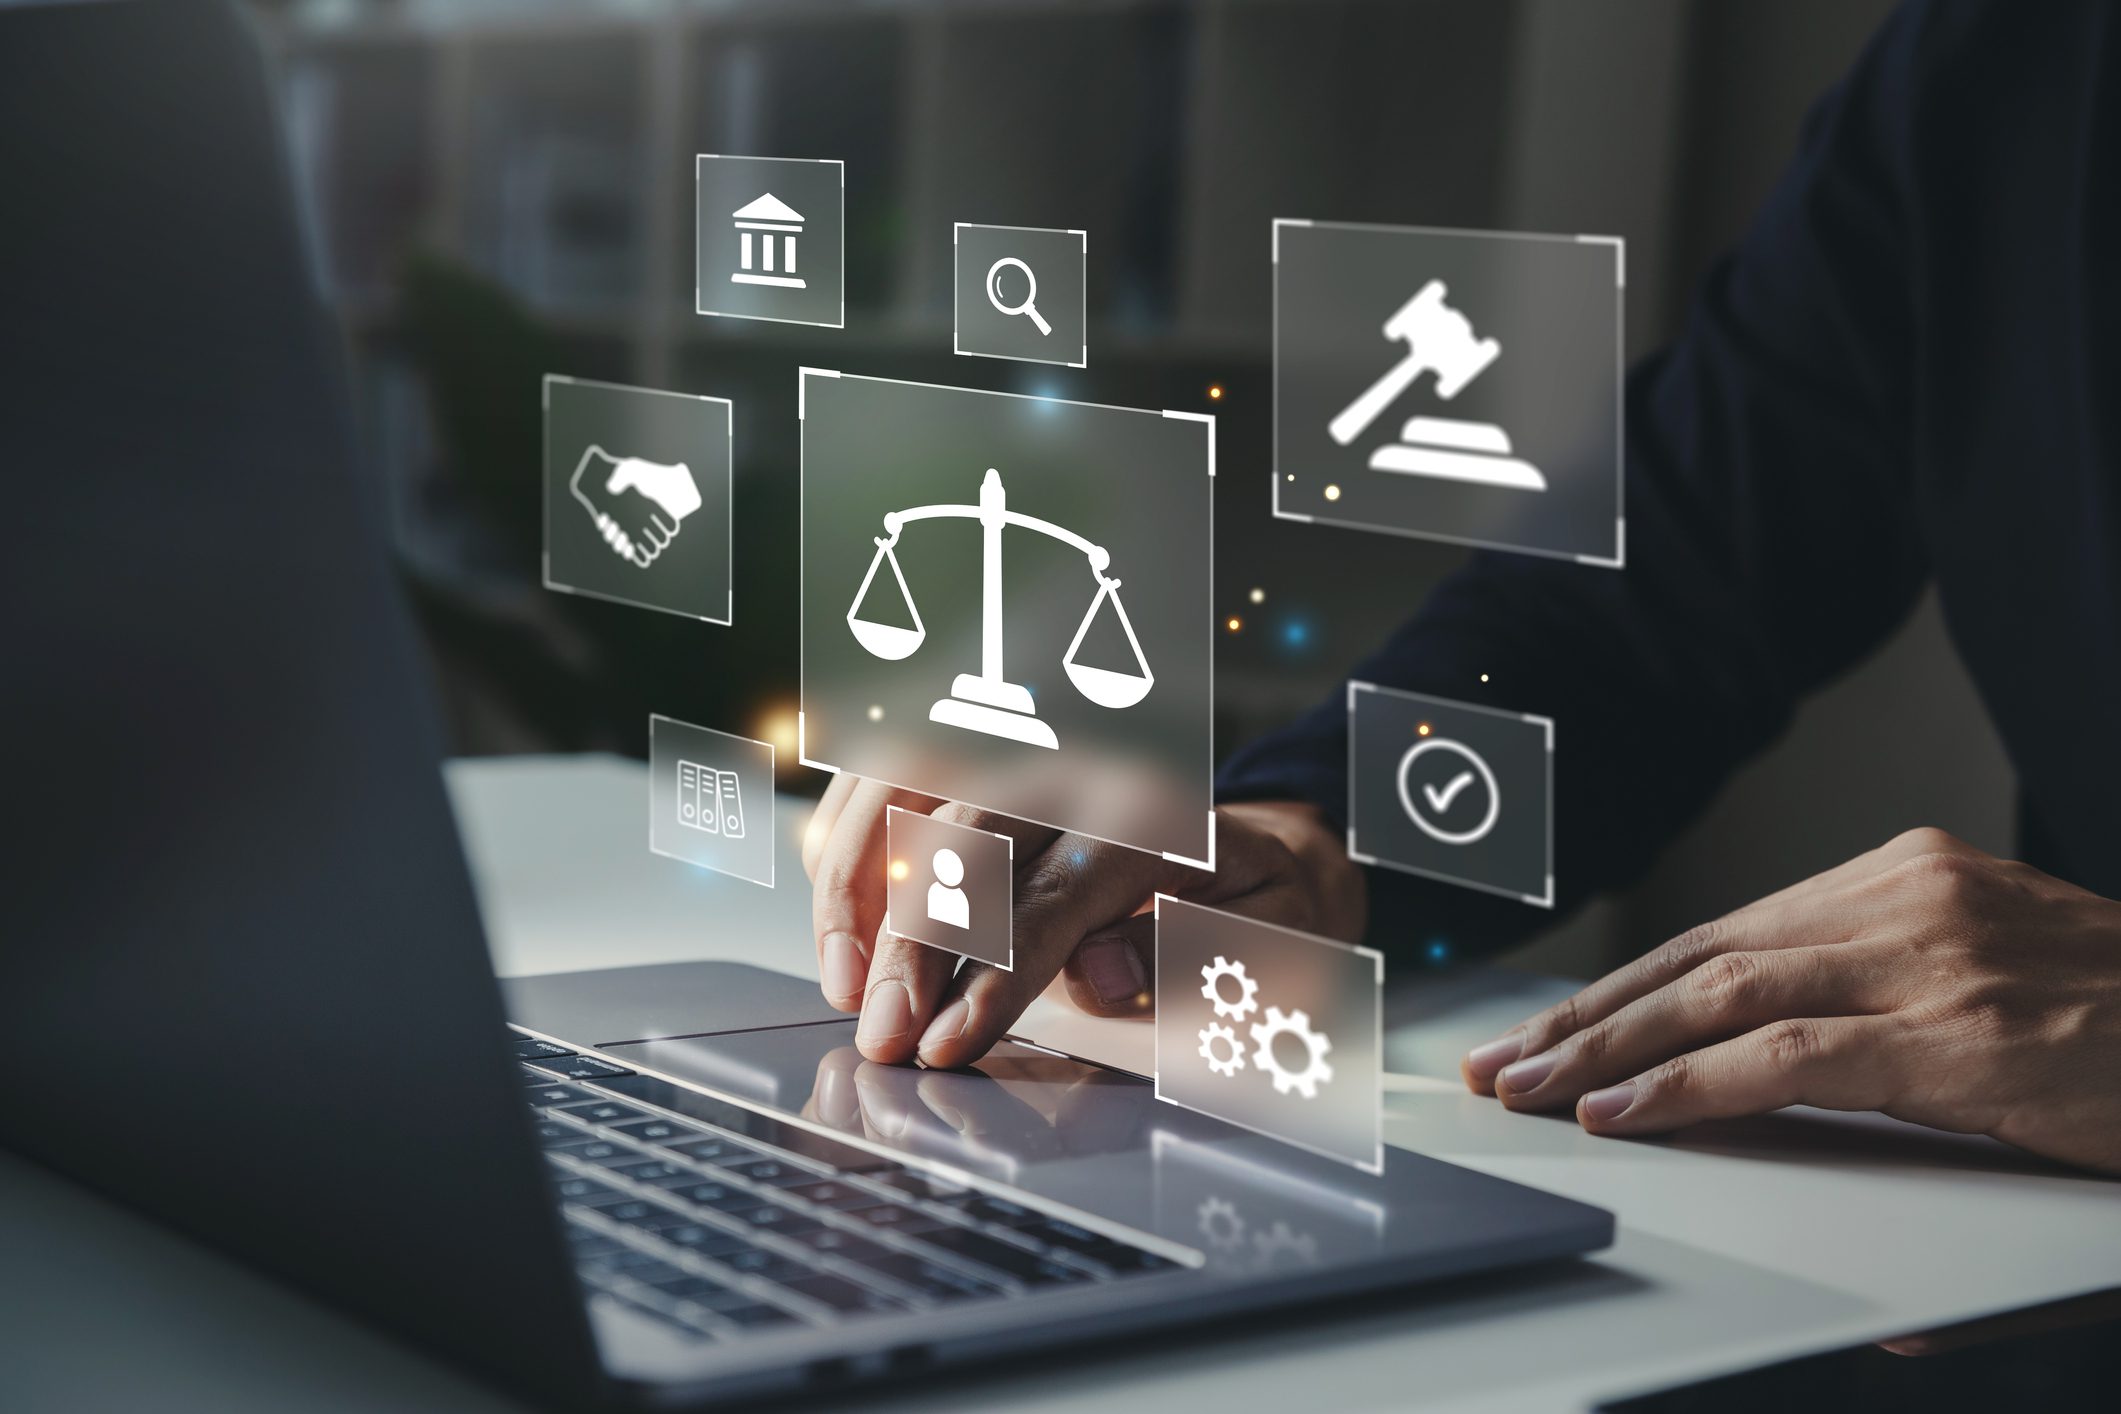 Hand of human with legal services icon on laptop screen.